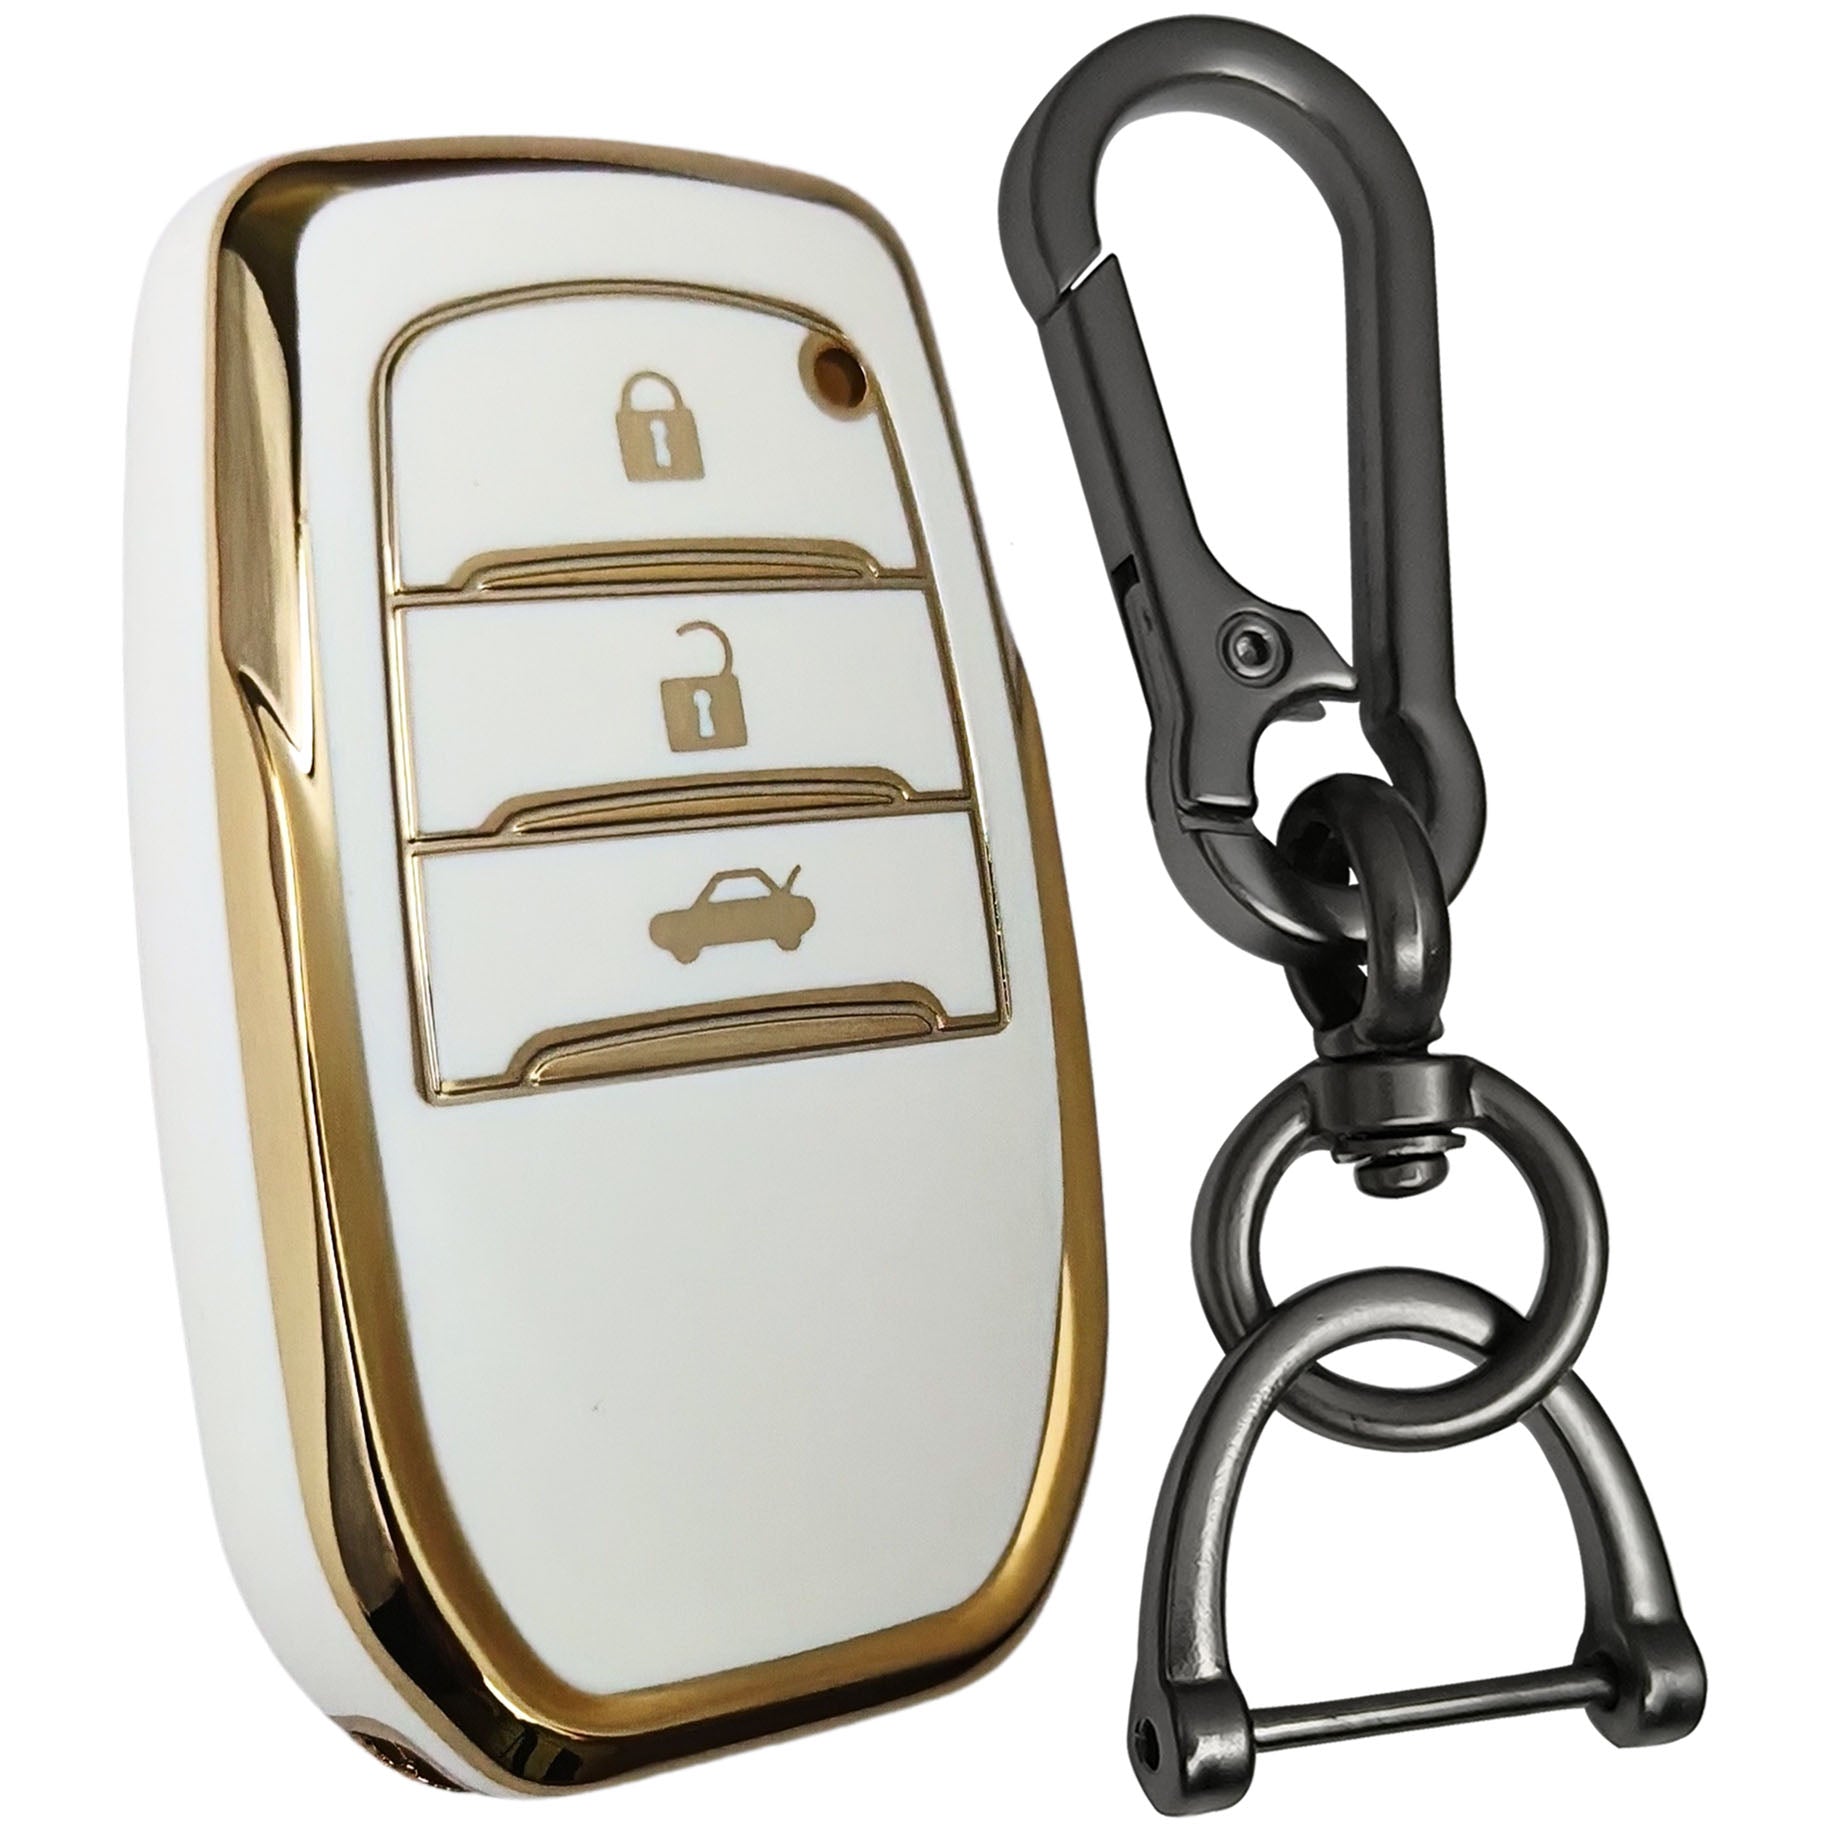 toyota innova crysta fortuner 3 button smart tpu white gold key cover case accessories keychain